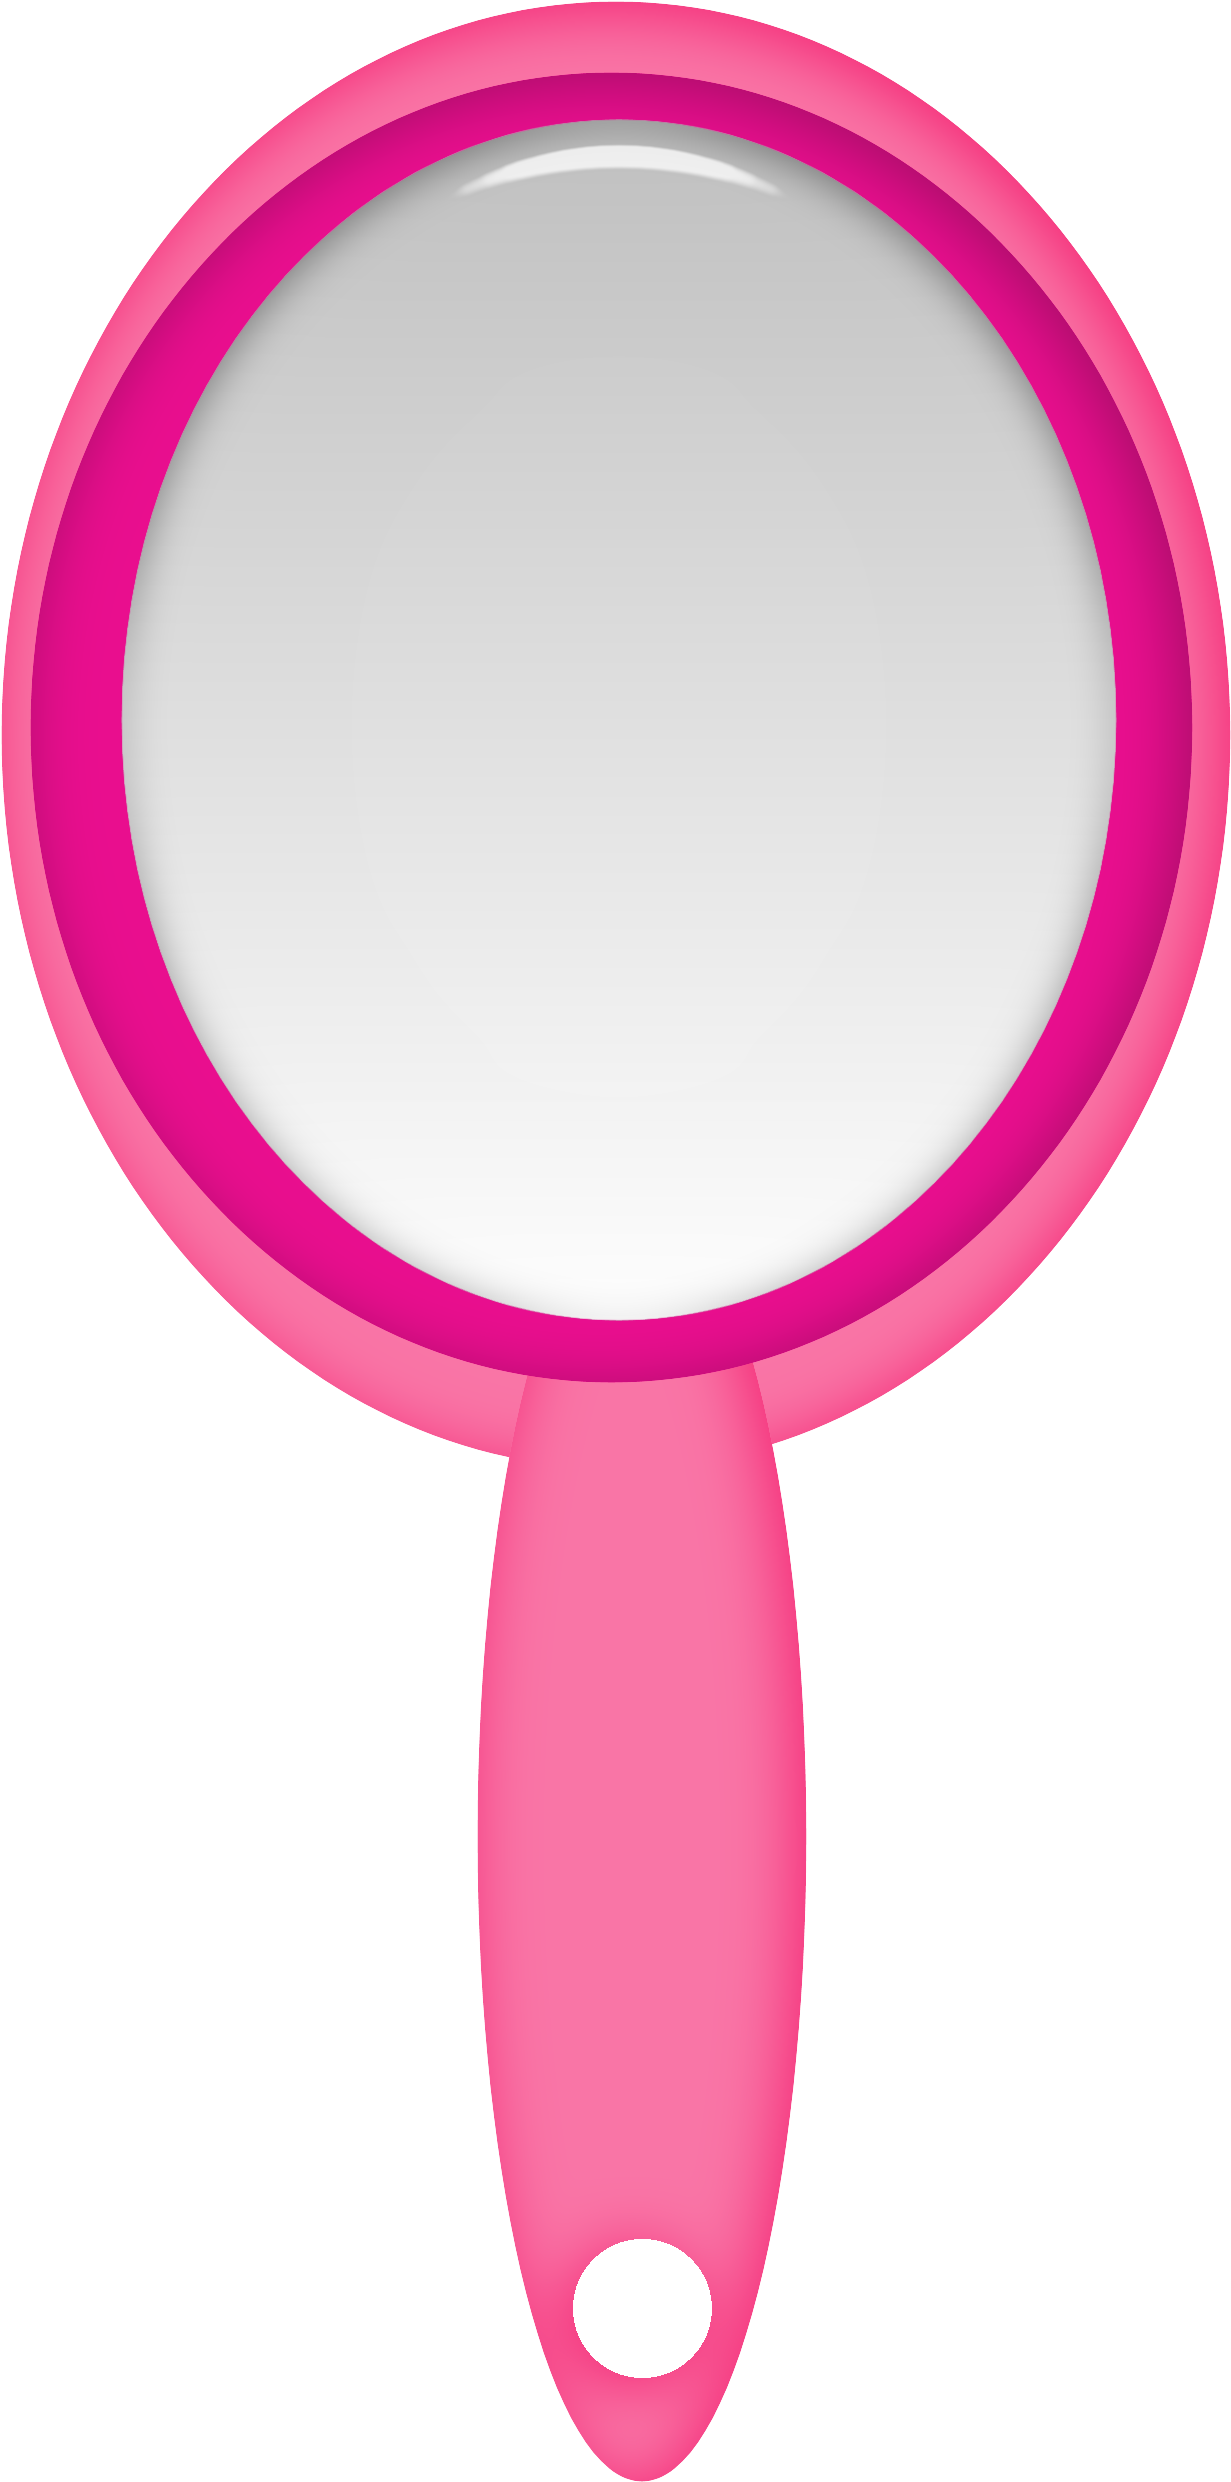 Download fun png image. Girly clipart mirror